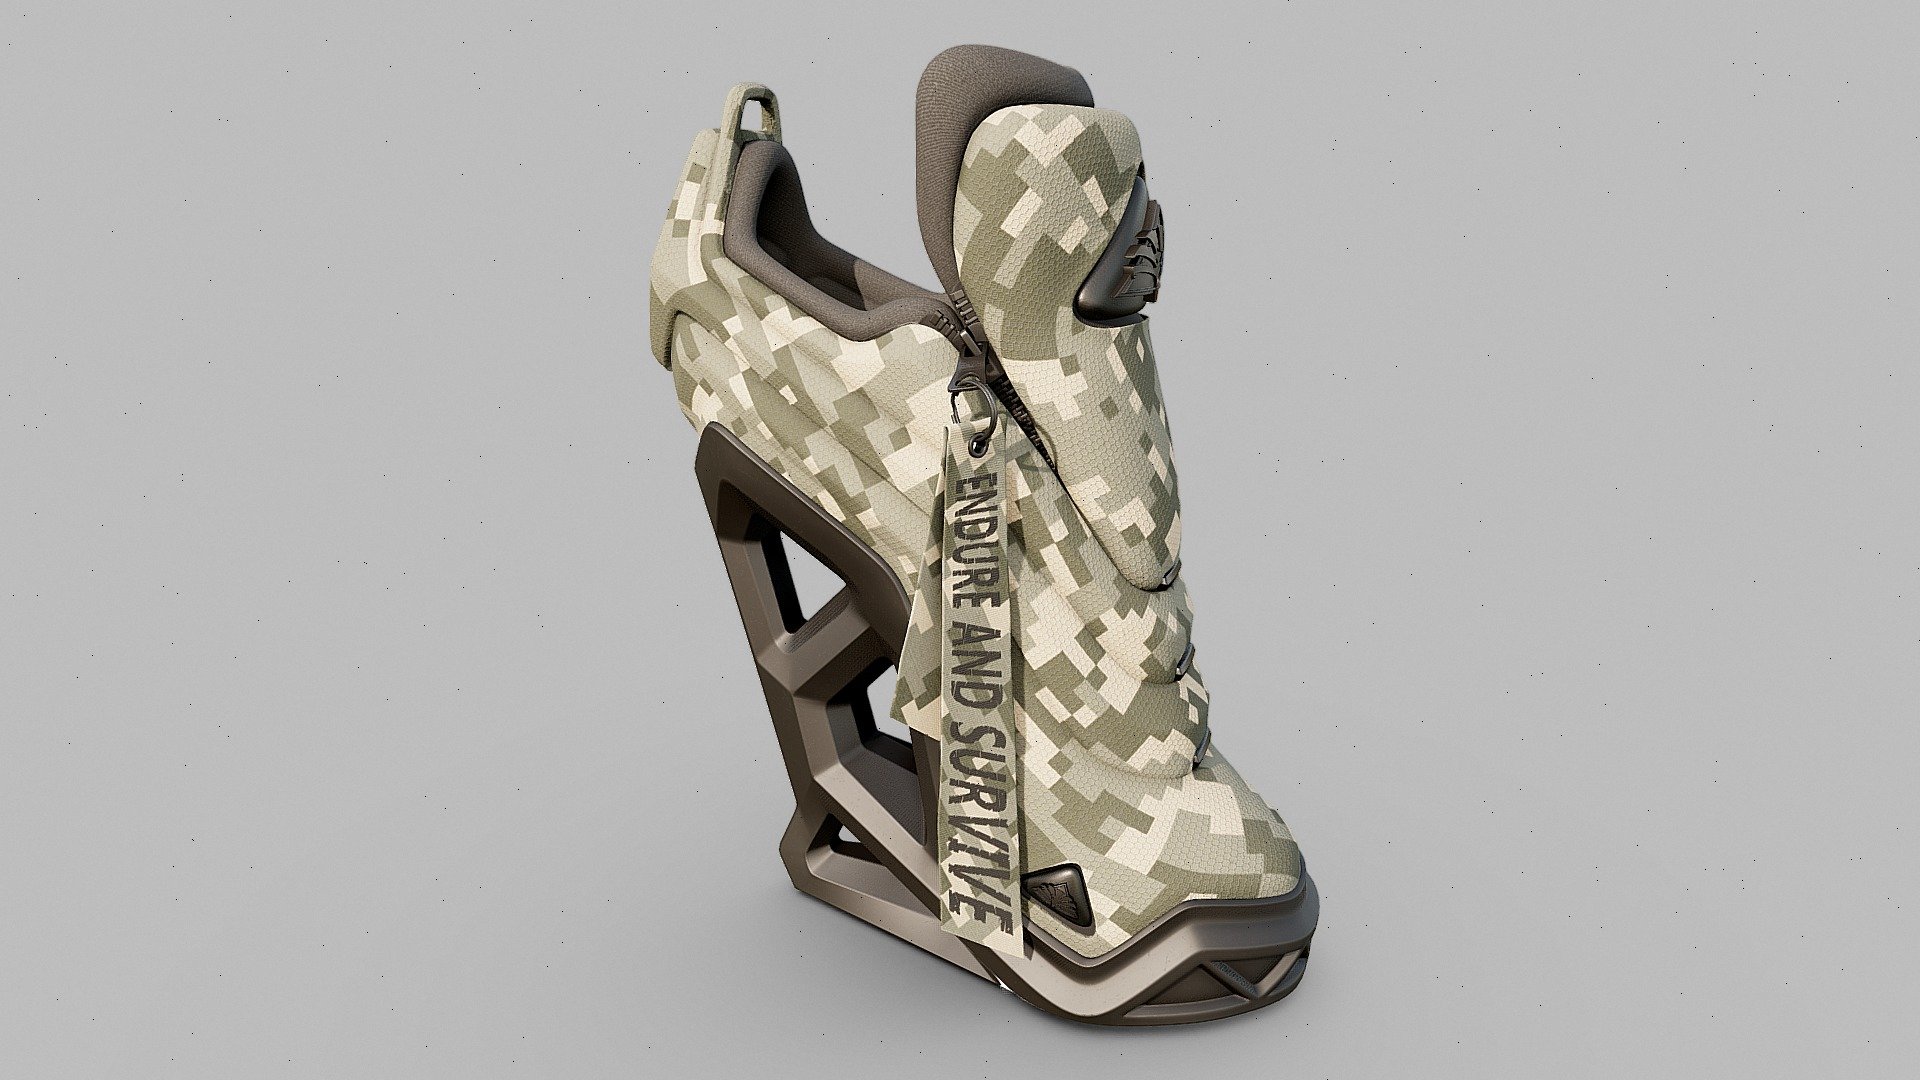 This model is perfect for character creation, visualization, and a variety of other purposes. The boot was designed and sculpted with ZBrush and textured with Substance Painter for a realistic look and feel.The design exudes innovation and luxury, radiating an air of confidence and sophistication in street wear! Pumping the boot with a pump on the front will inflate air cushions around the feet, providing an unparalleled level of comfort. Thanks to a special sole, the platform provides a one-of-a-kind walking experience by reducing the sound of each step to the whisper of a falling feather! And the special sensors will gather all the necessary data to optimize your wellness experience.

BEHANCE presentation https://www.behance.net/gallery/178998135/COMFY-HEELS-CRYPTO

Unreal Engine 5.1.1 version with a mirrored pair of heels included!

See the versions: (BLK&amp;GLD) https://skfb.ly/oDVMI  (BLK) https://skfb.ly/oDIHz  (WHT&amp;GLD) https://skfb.ly/oFvZB (GLD) https://skfb.ly/oJPCr
(BLK &amp; WHT) https://skfb.ly/oKMFx - COMFY HEEL CAMO - Buy Royalty Free 3D model by Bartholomew Koziel (@bkoziel) 3d model